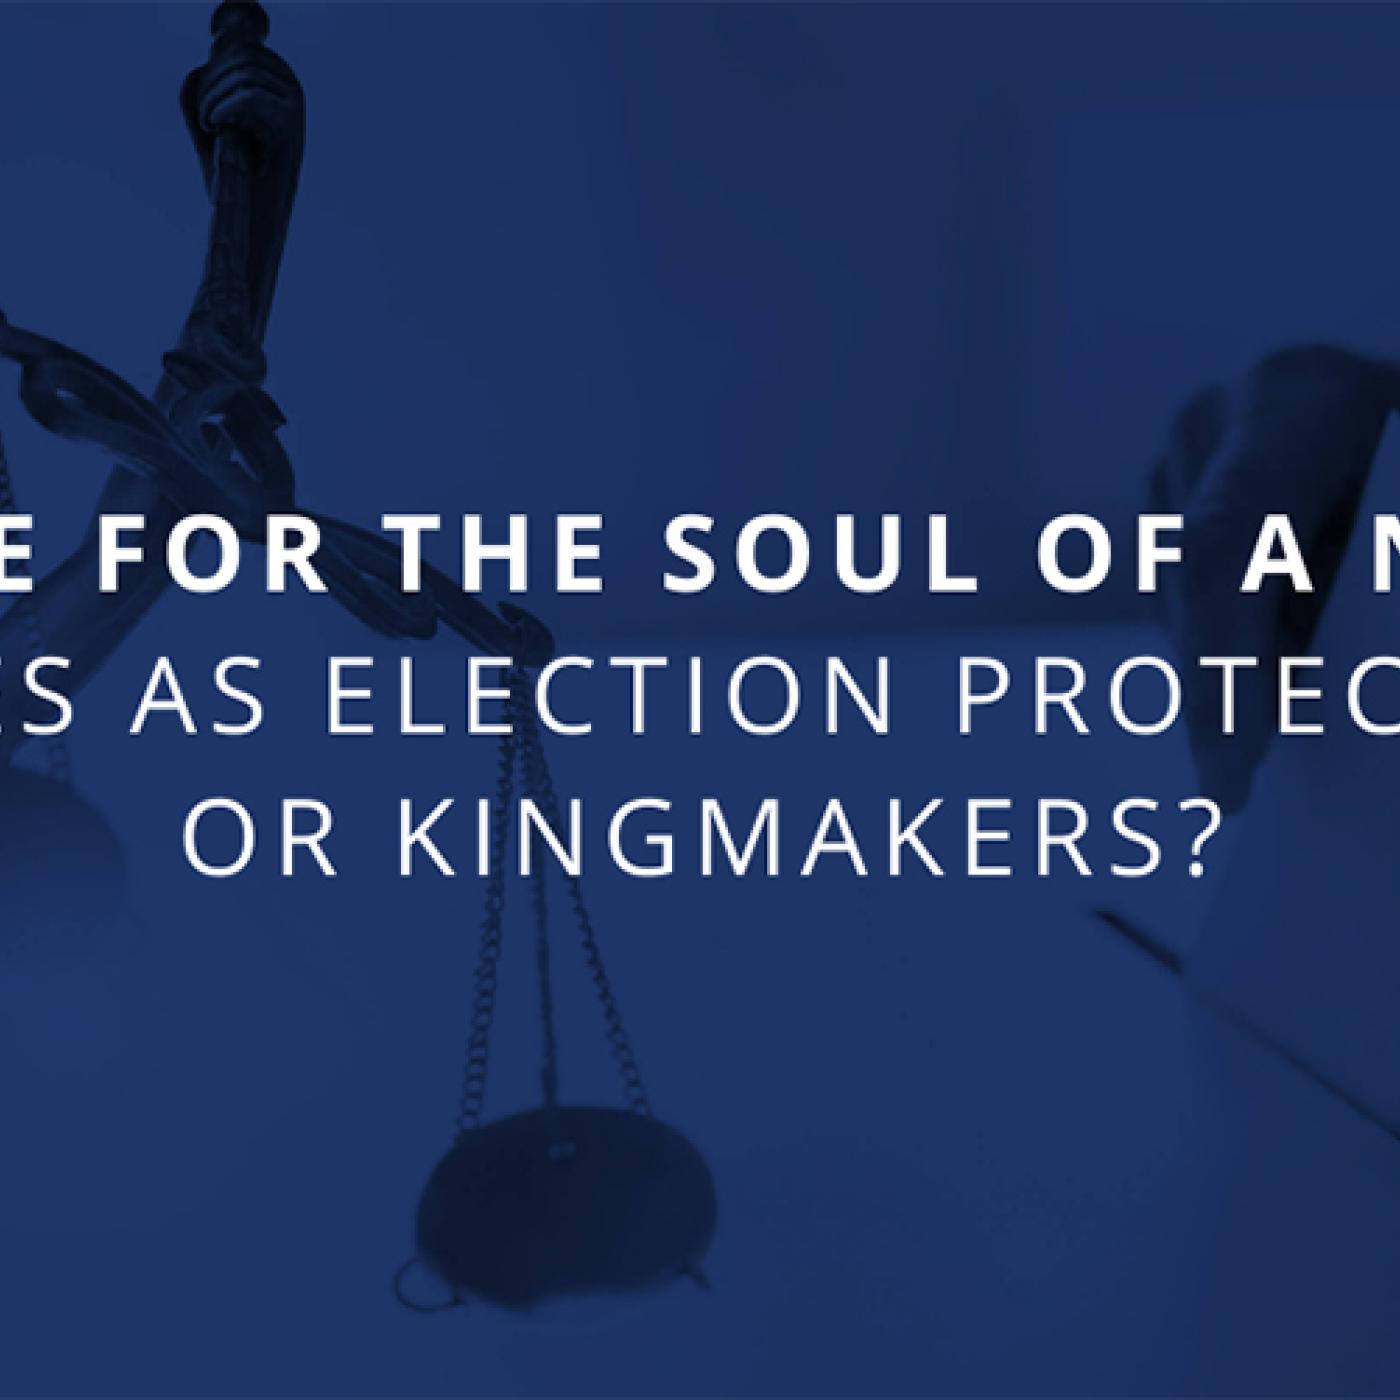 Text: A Battle for the Soul of a Nation: Judges as Election Protectors or Kingmakers? | Background: Images of a statue holding the scales of a justice and a voter casting their ballot.